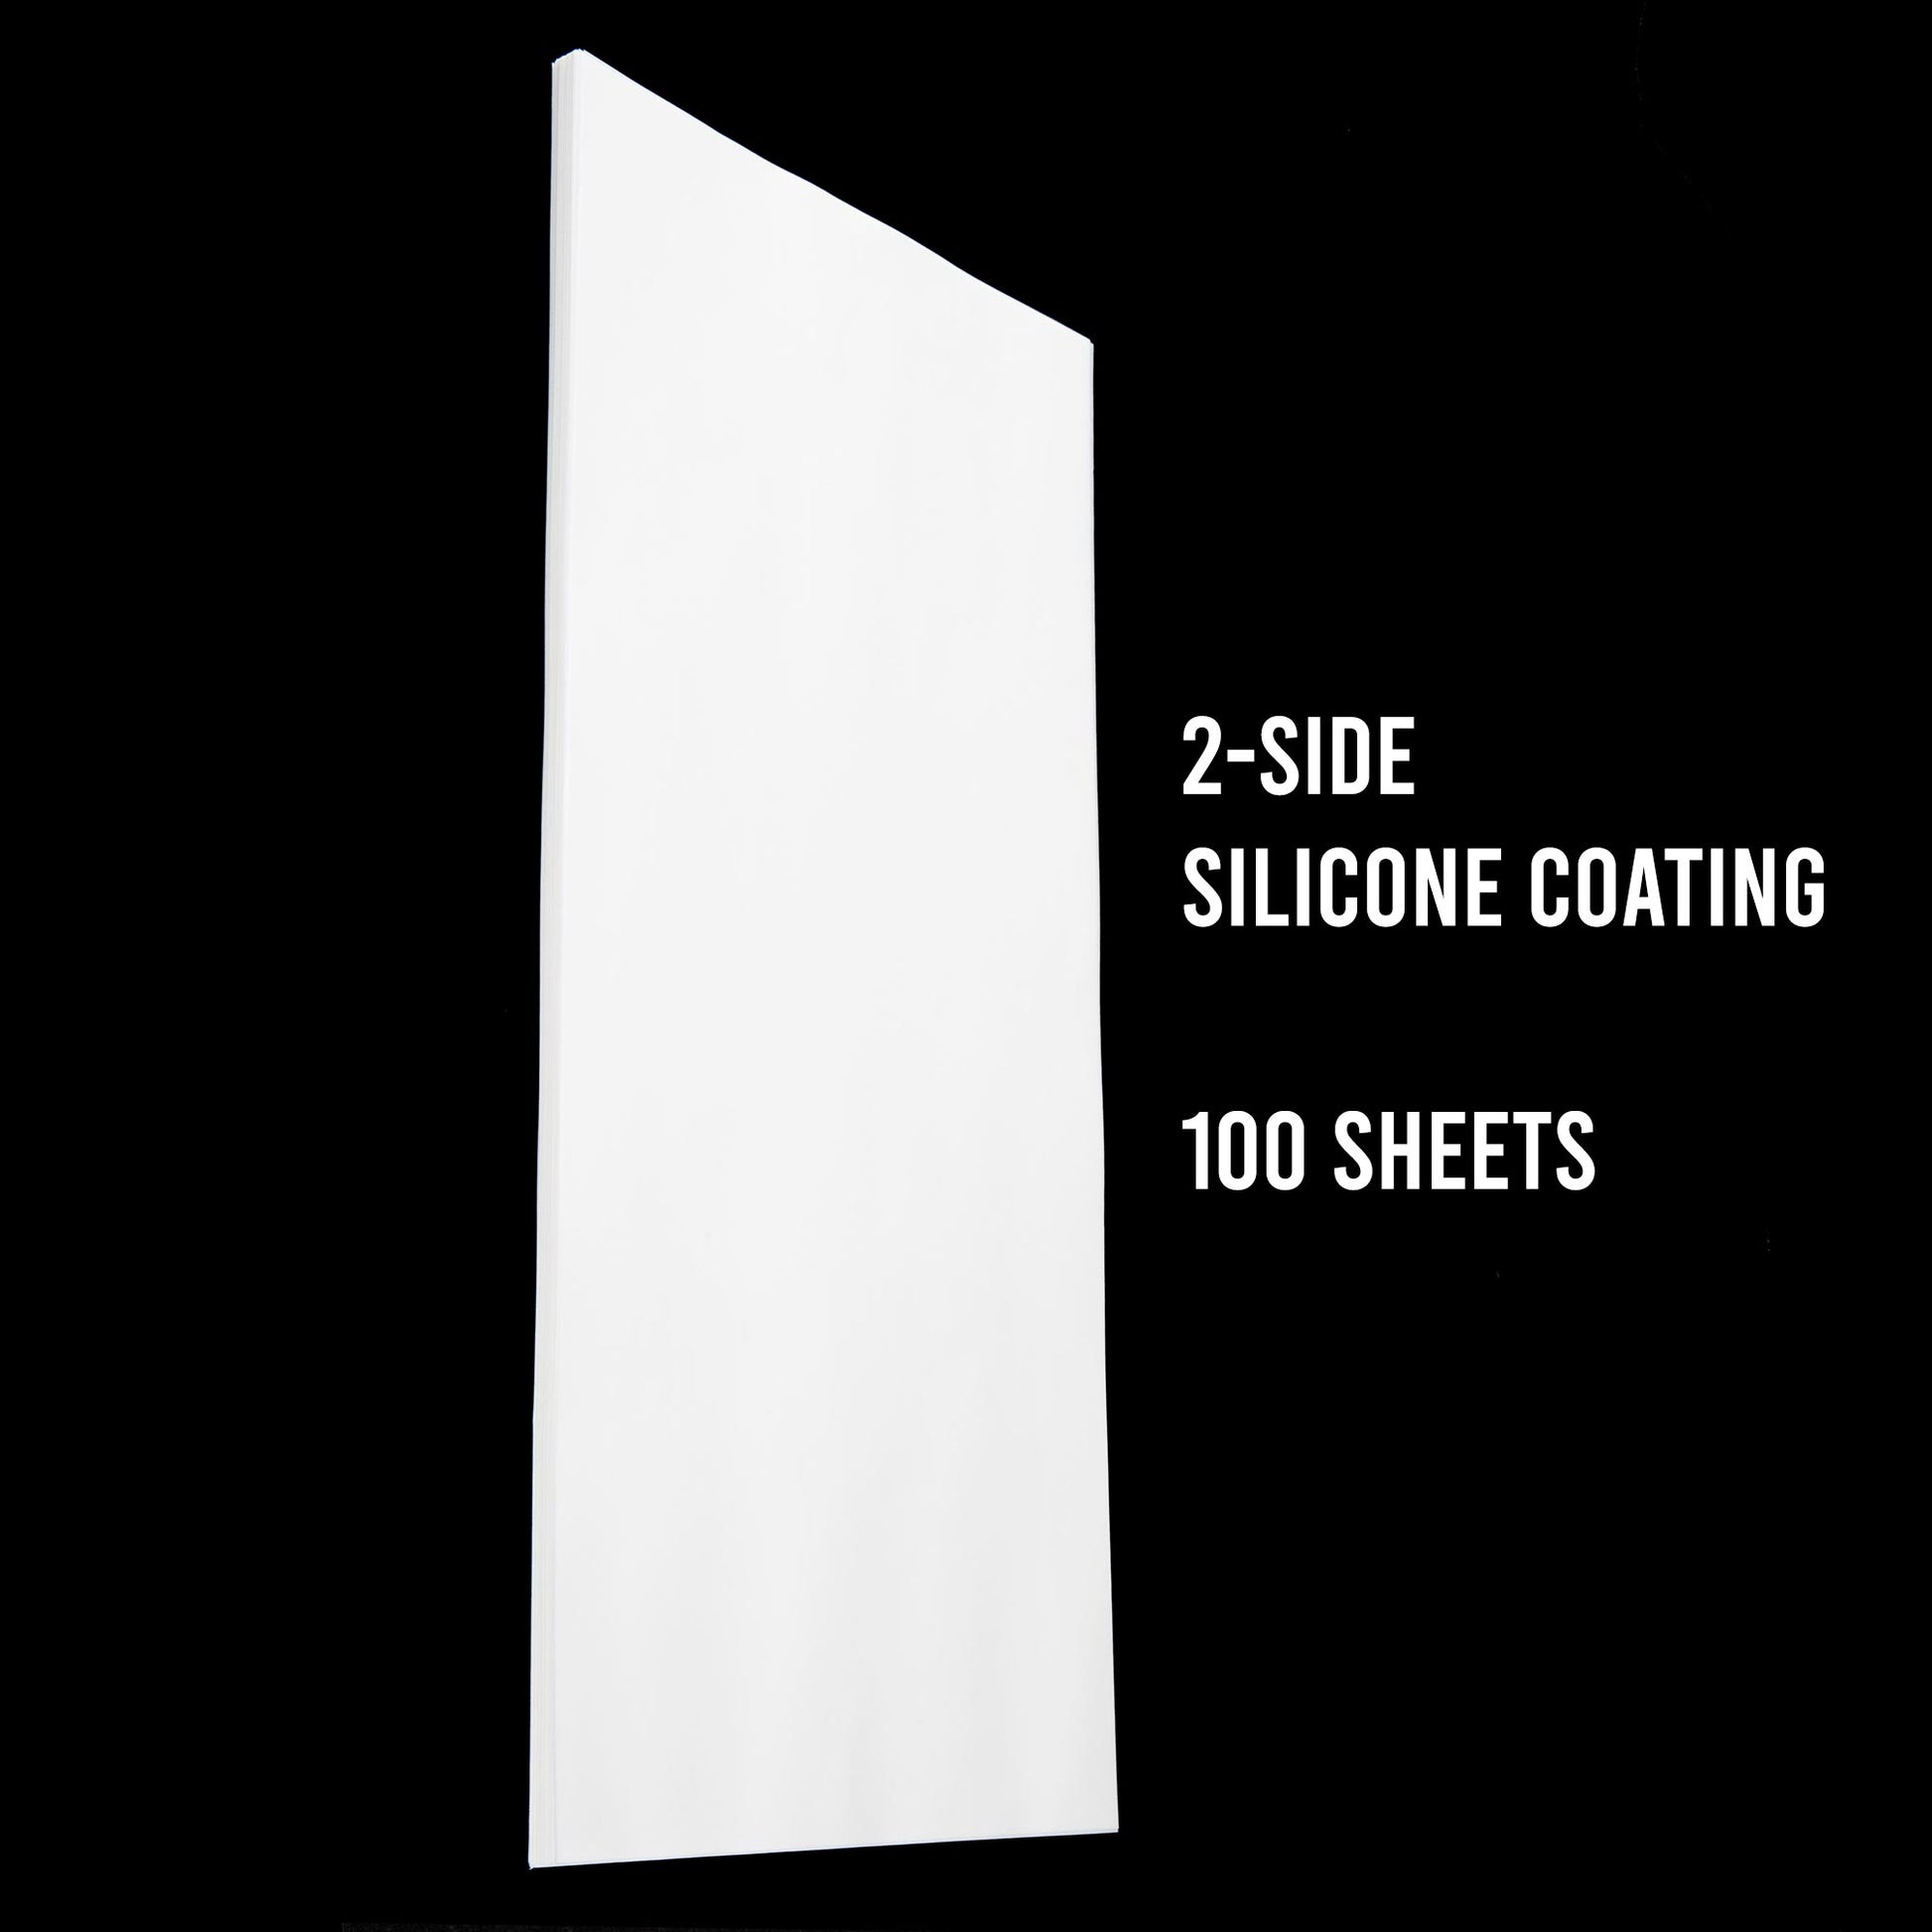 Pre-Cut Parchment Paper for Heating Press - Slick Silicone Coating on Double Sides-100 Sheet Pack (4x 6)